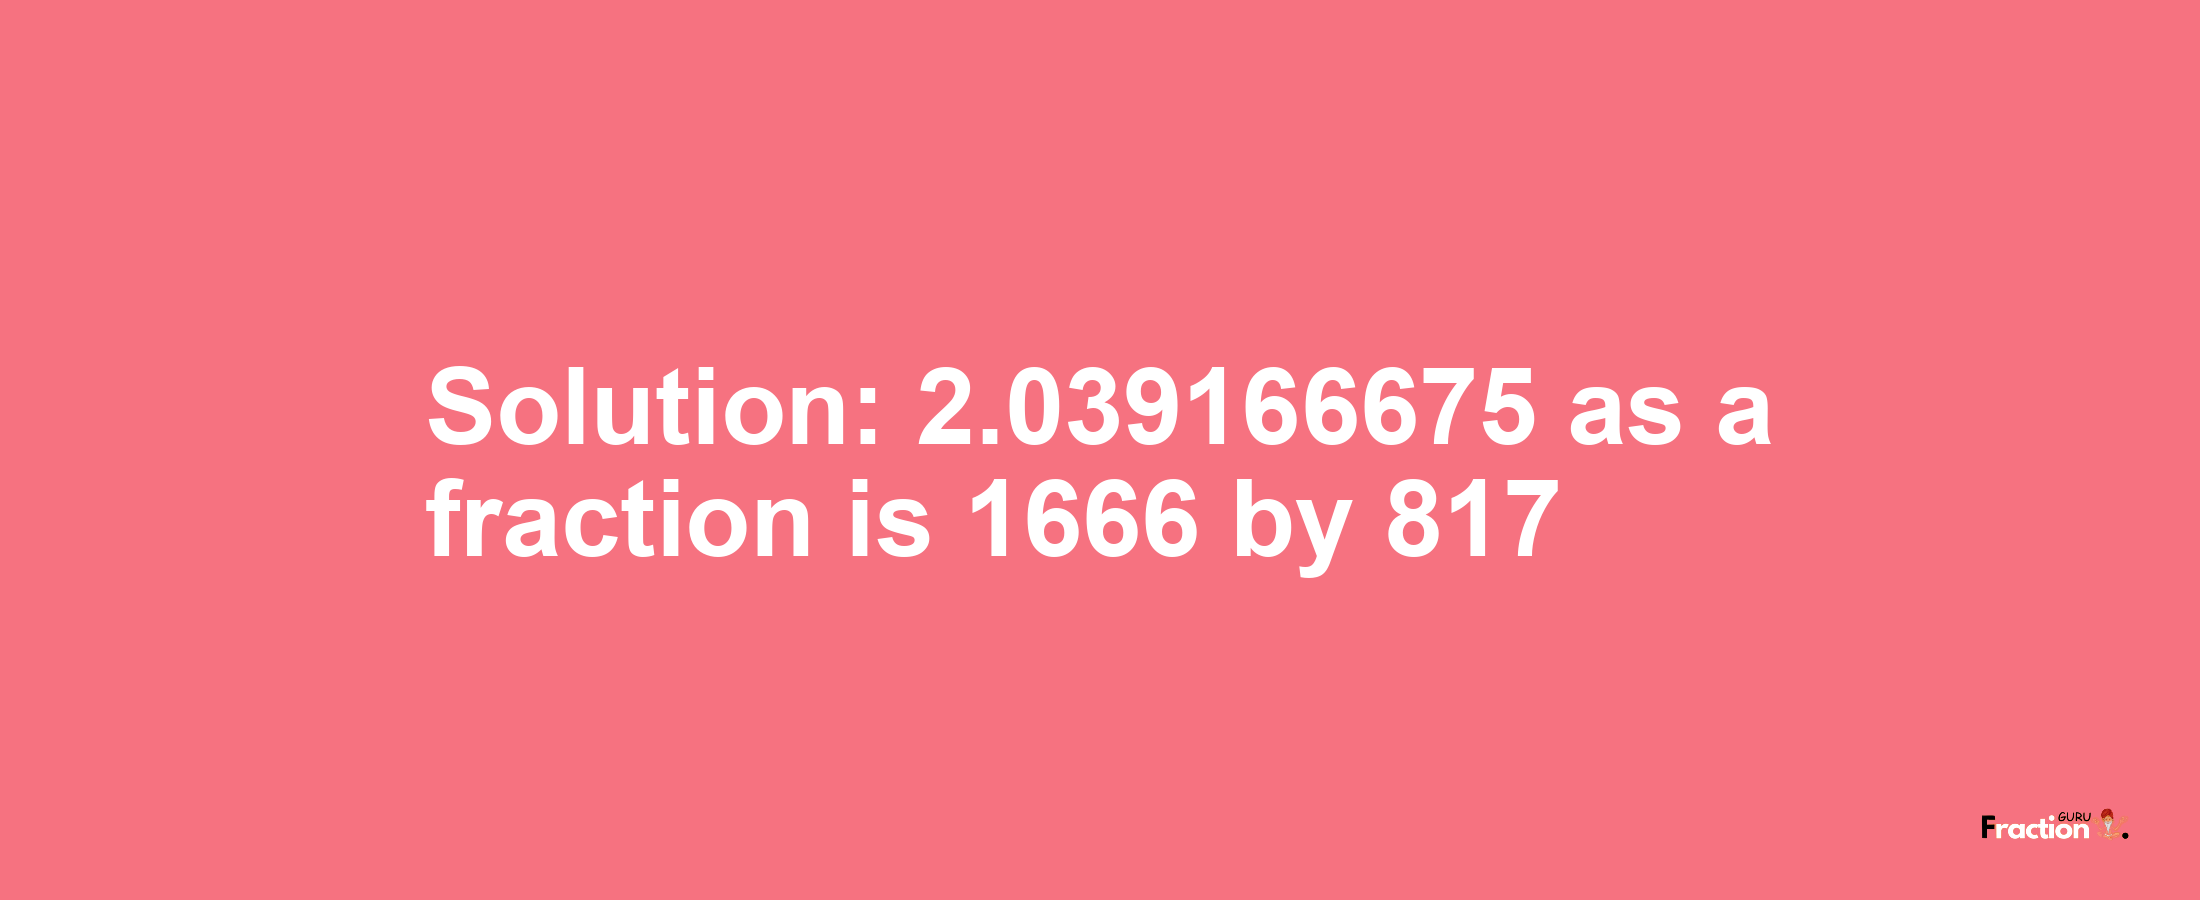 Solution:2.039166675 as a fraction is 1666/817